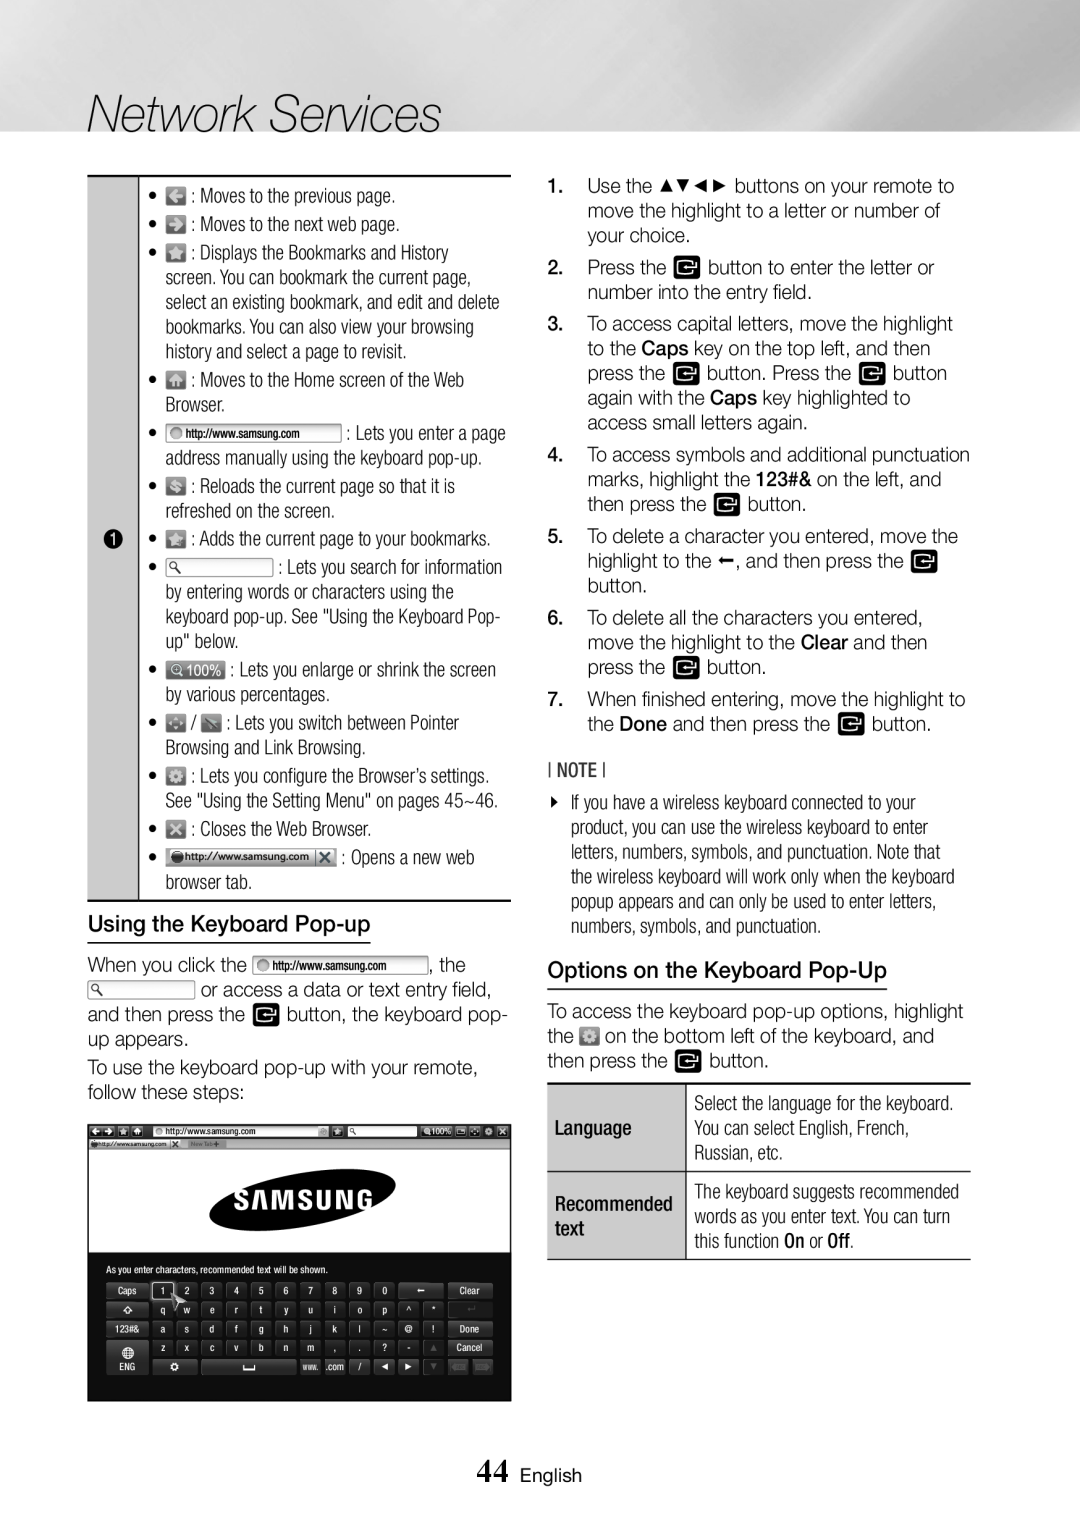 Samsung BD-J7500/EN, BD-J7500/ZF manual Using the Keyboard Pop-up, Options on the Keyboard Pop-Up, Network Services 